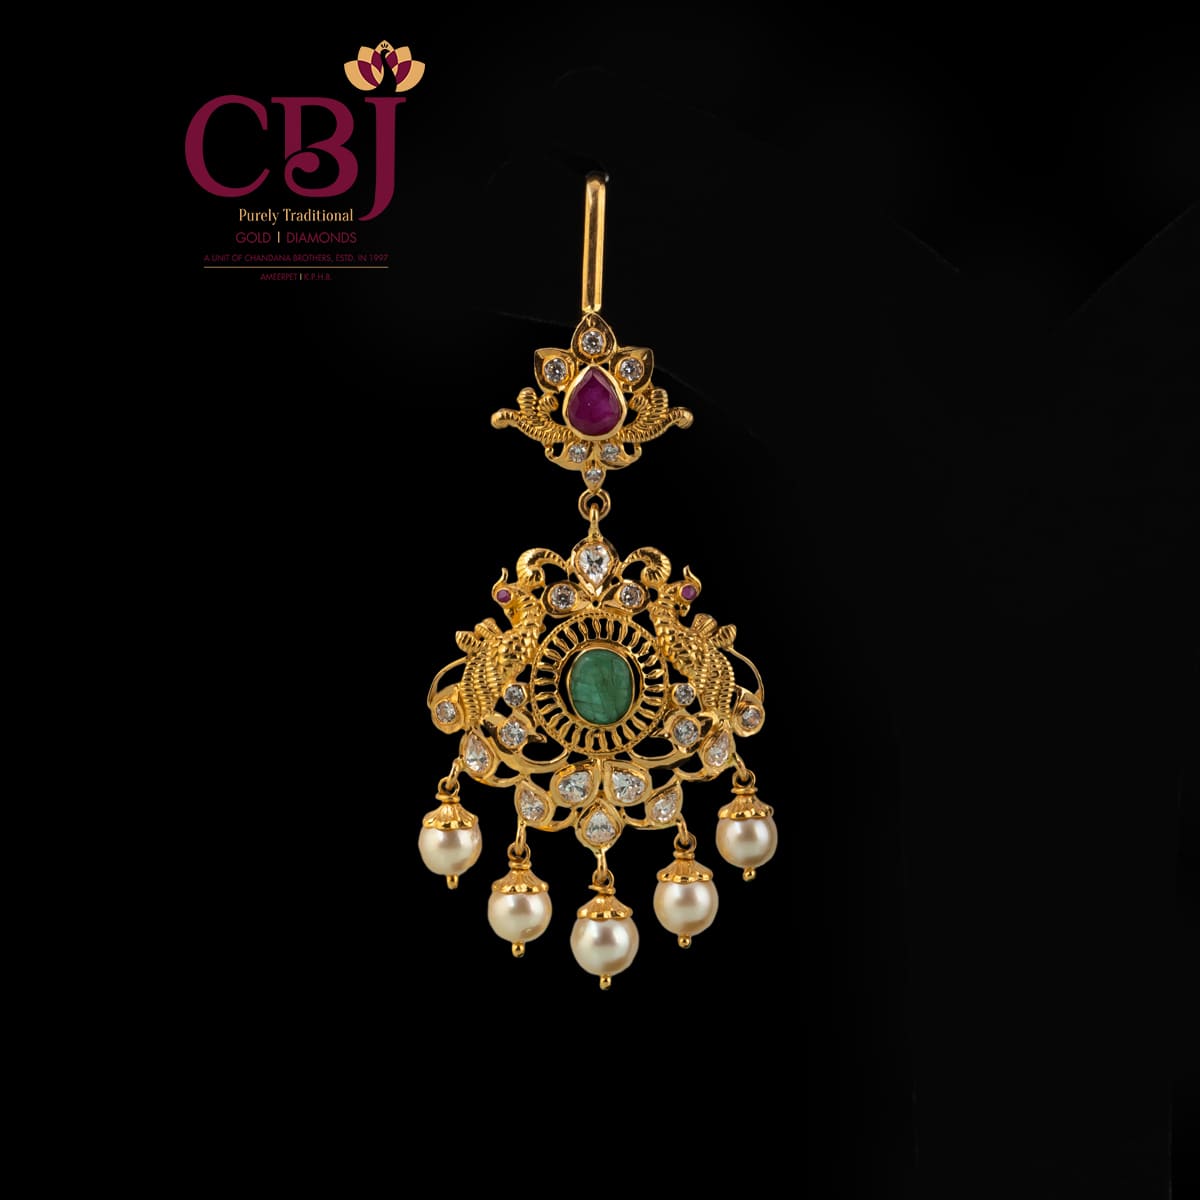 A simple maang tikka comprising of cz and emerald stones to enhance your traditional look.